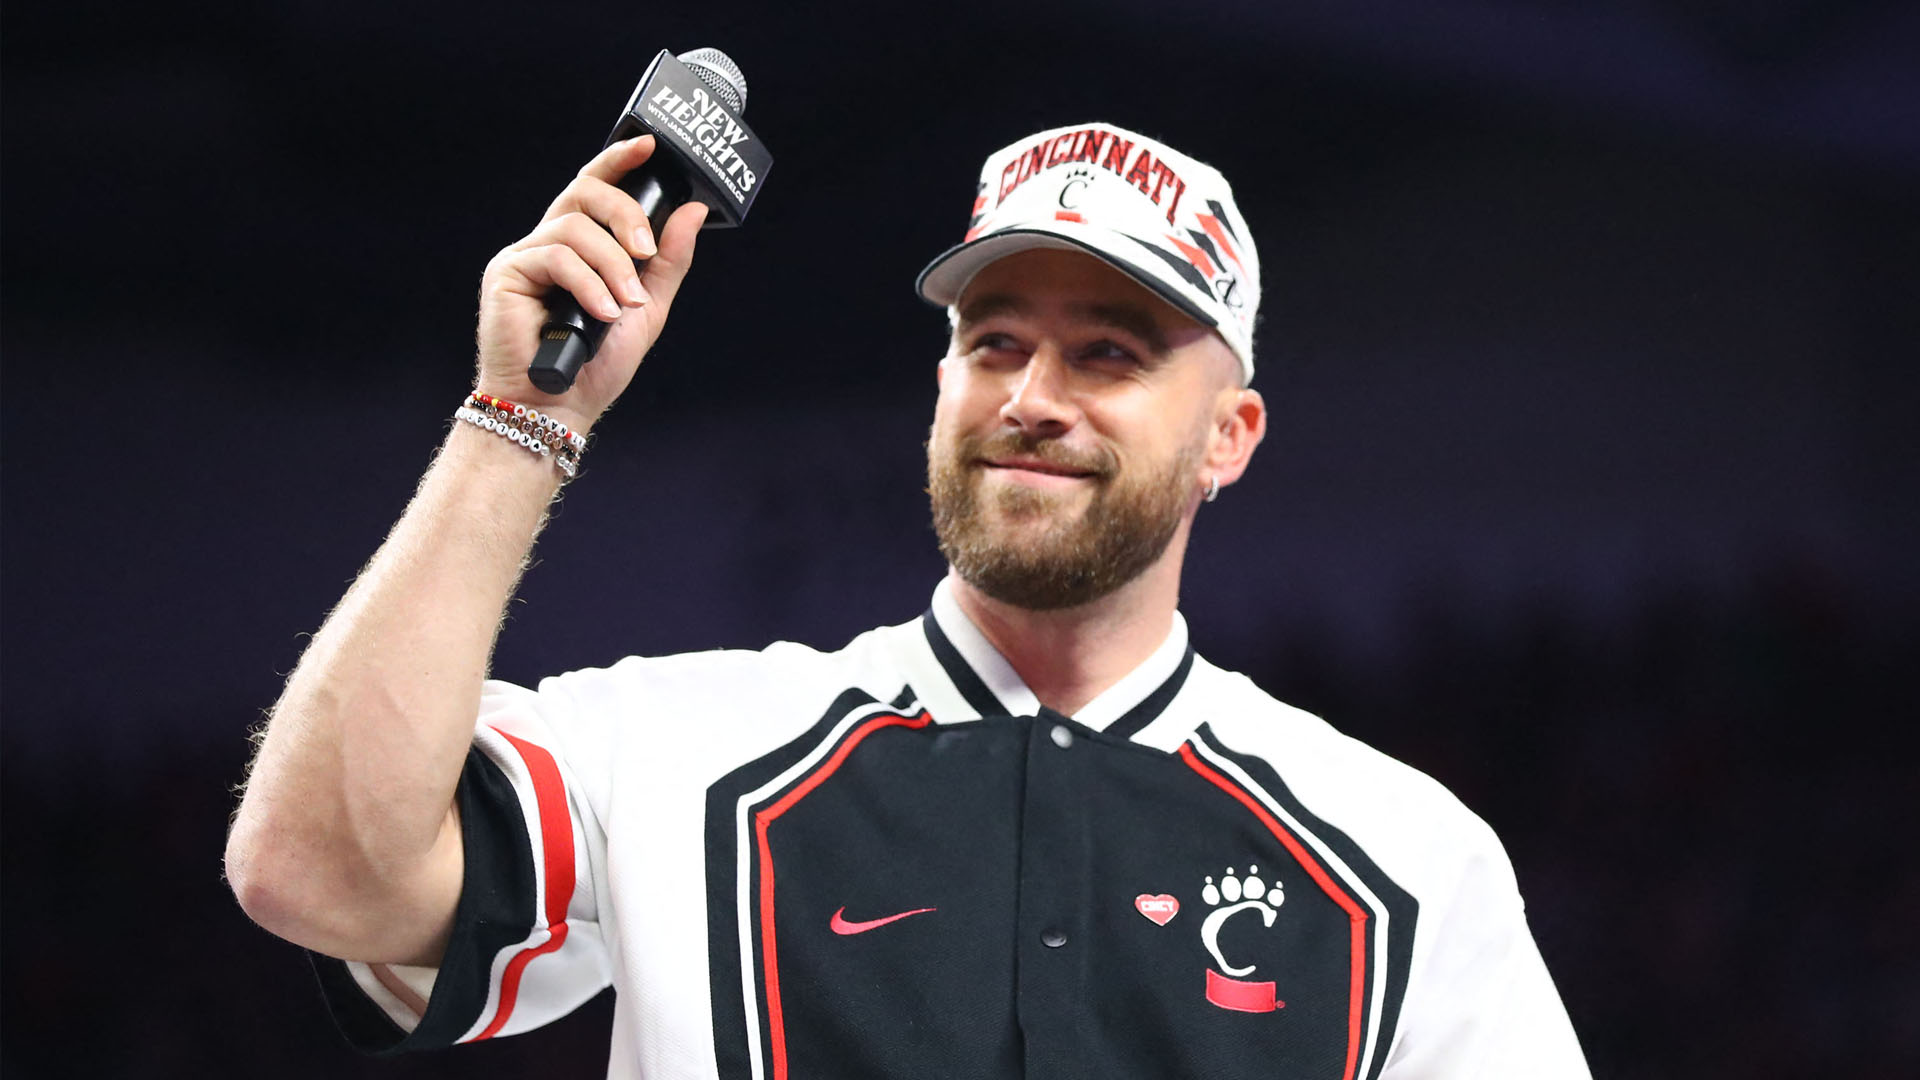 DONE DEAL Travis Kelce stuck with ‘low fee’ to host Are You Smarter Than a Celebrity? show as he signed contract pre-Taylor Swift; The Kansas City Chiefs player has missed out on making millions with his new Amazon TV gig but apparently "doesn't care"